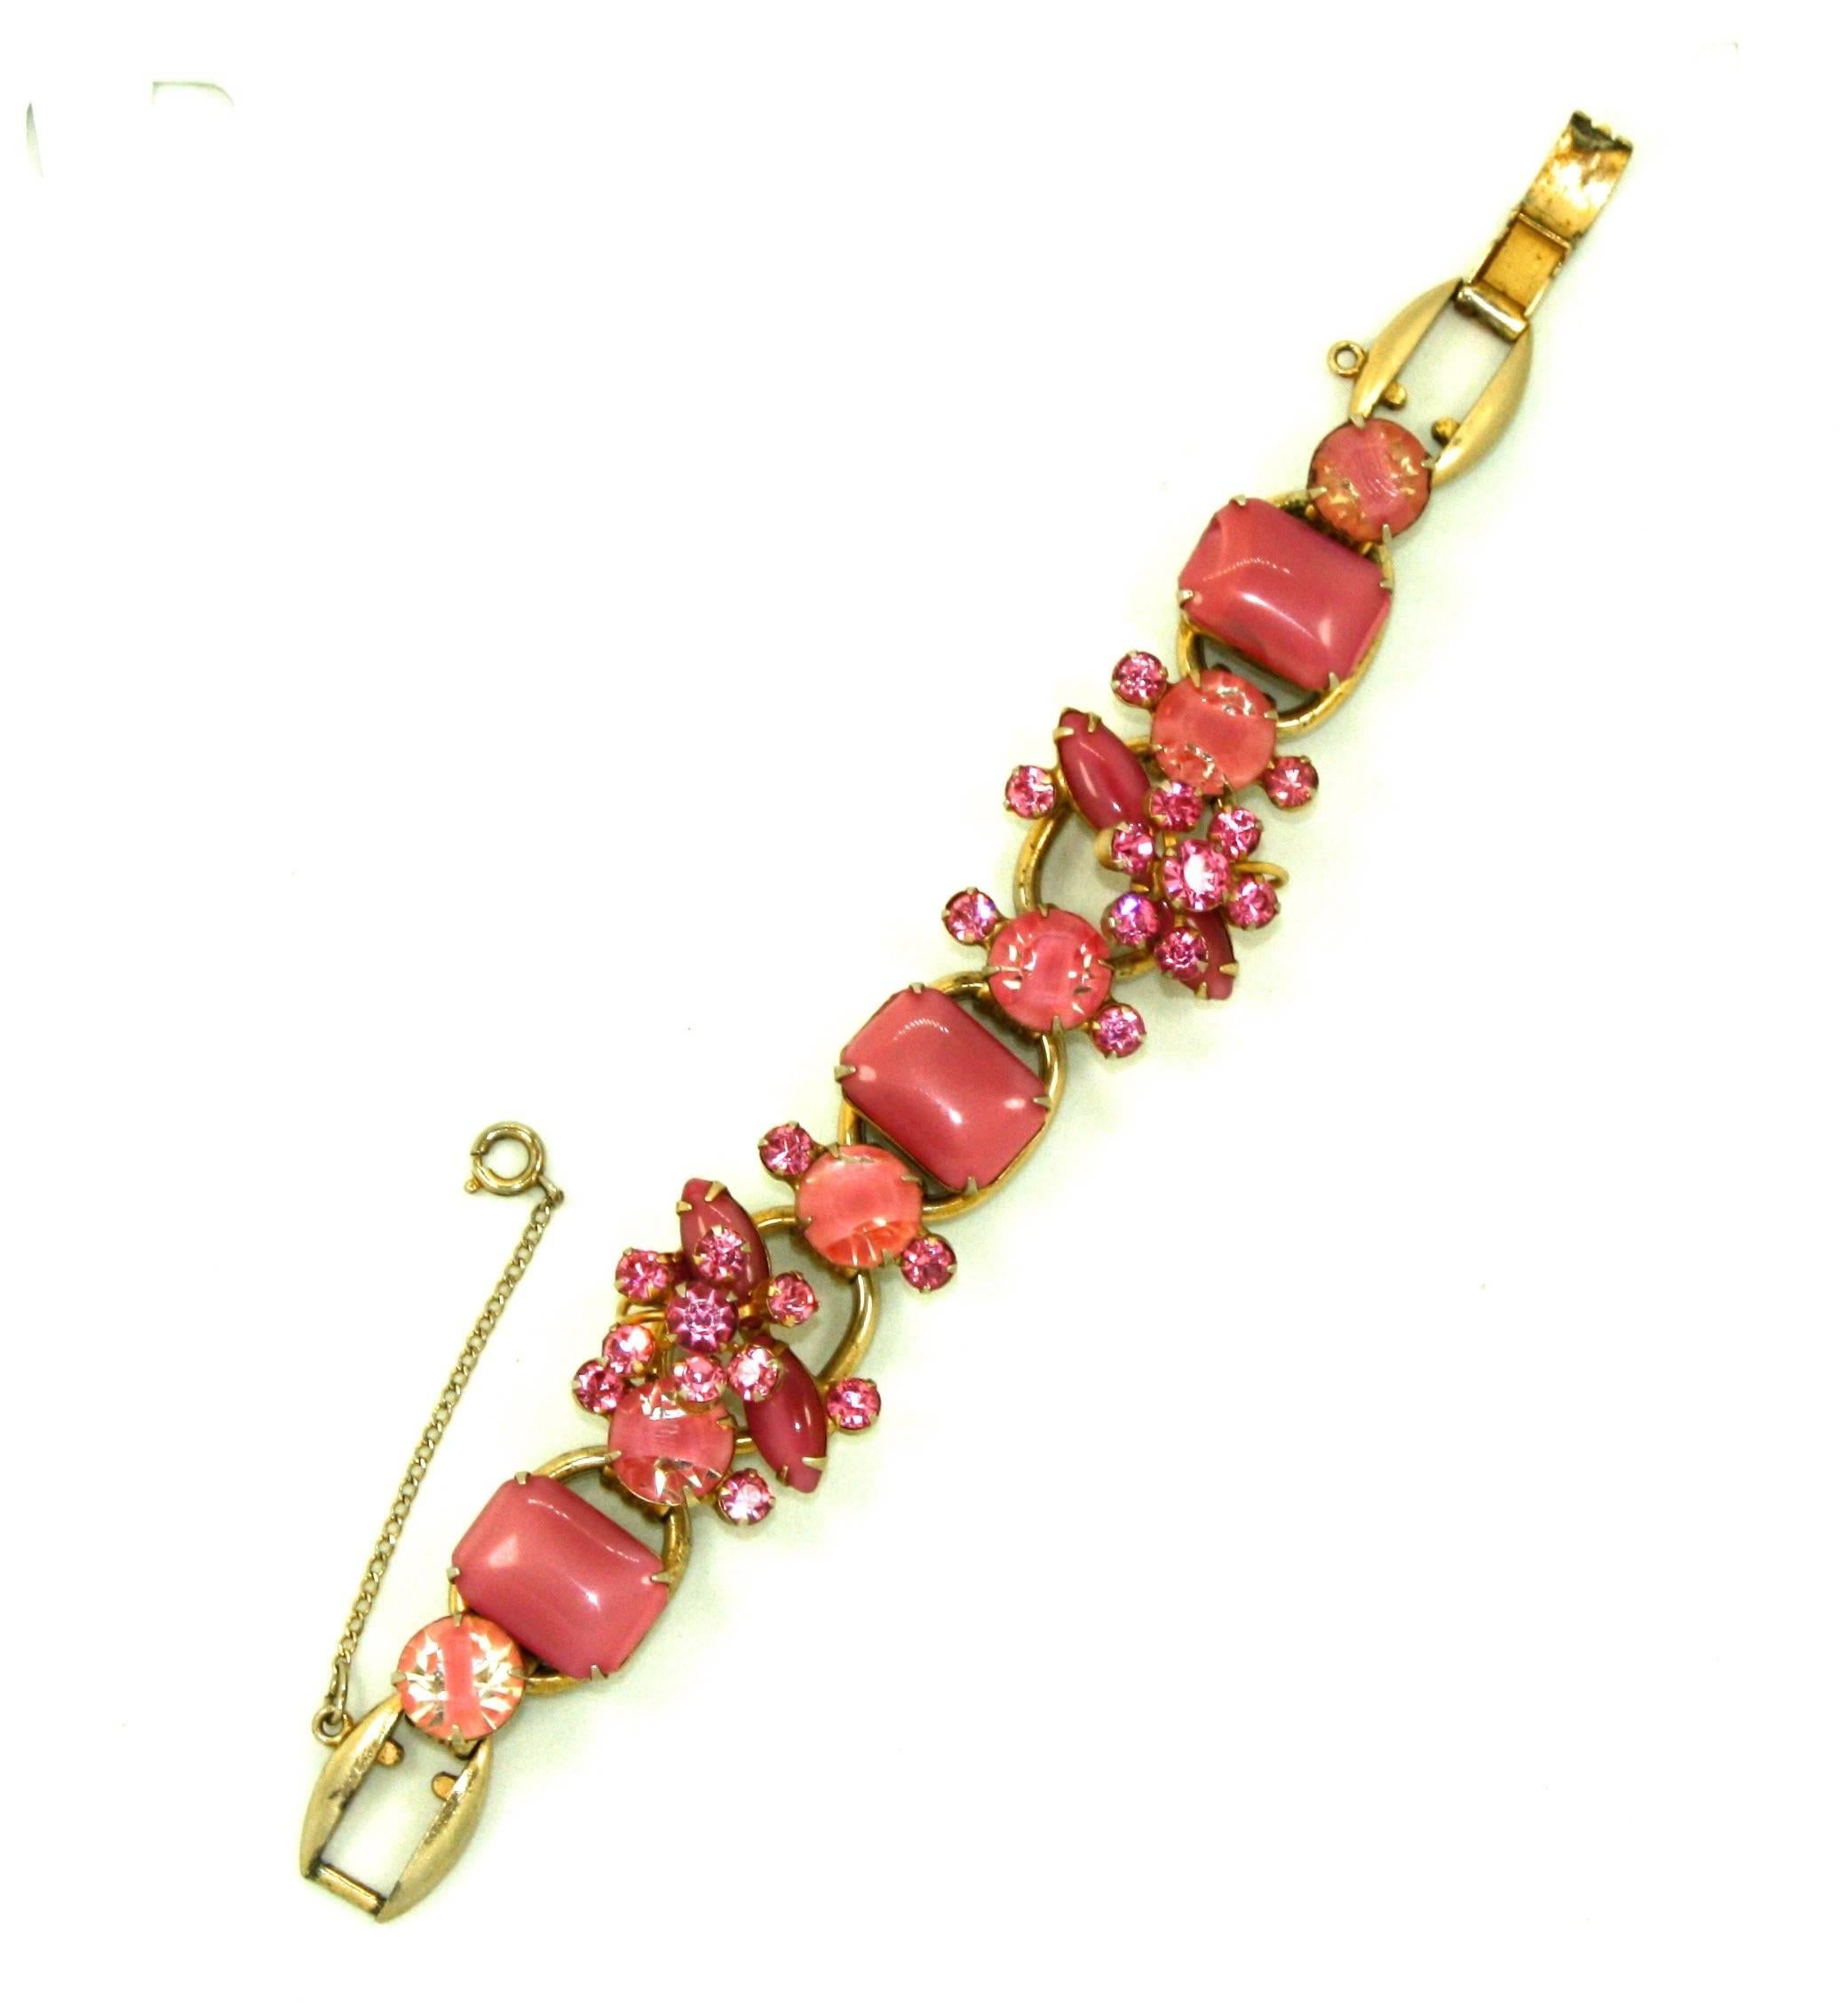 Stunning pink stone bracelet from the Juliana line by American costume jewellery company DeLizza & Elster. An array of dusky pink satin glass (or pink moonstone), bi-coloured and diamante stones are prong set into a classic Juliana bracelet